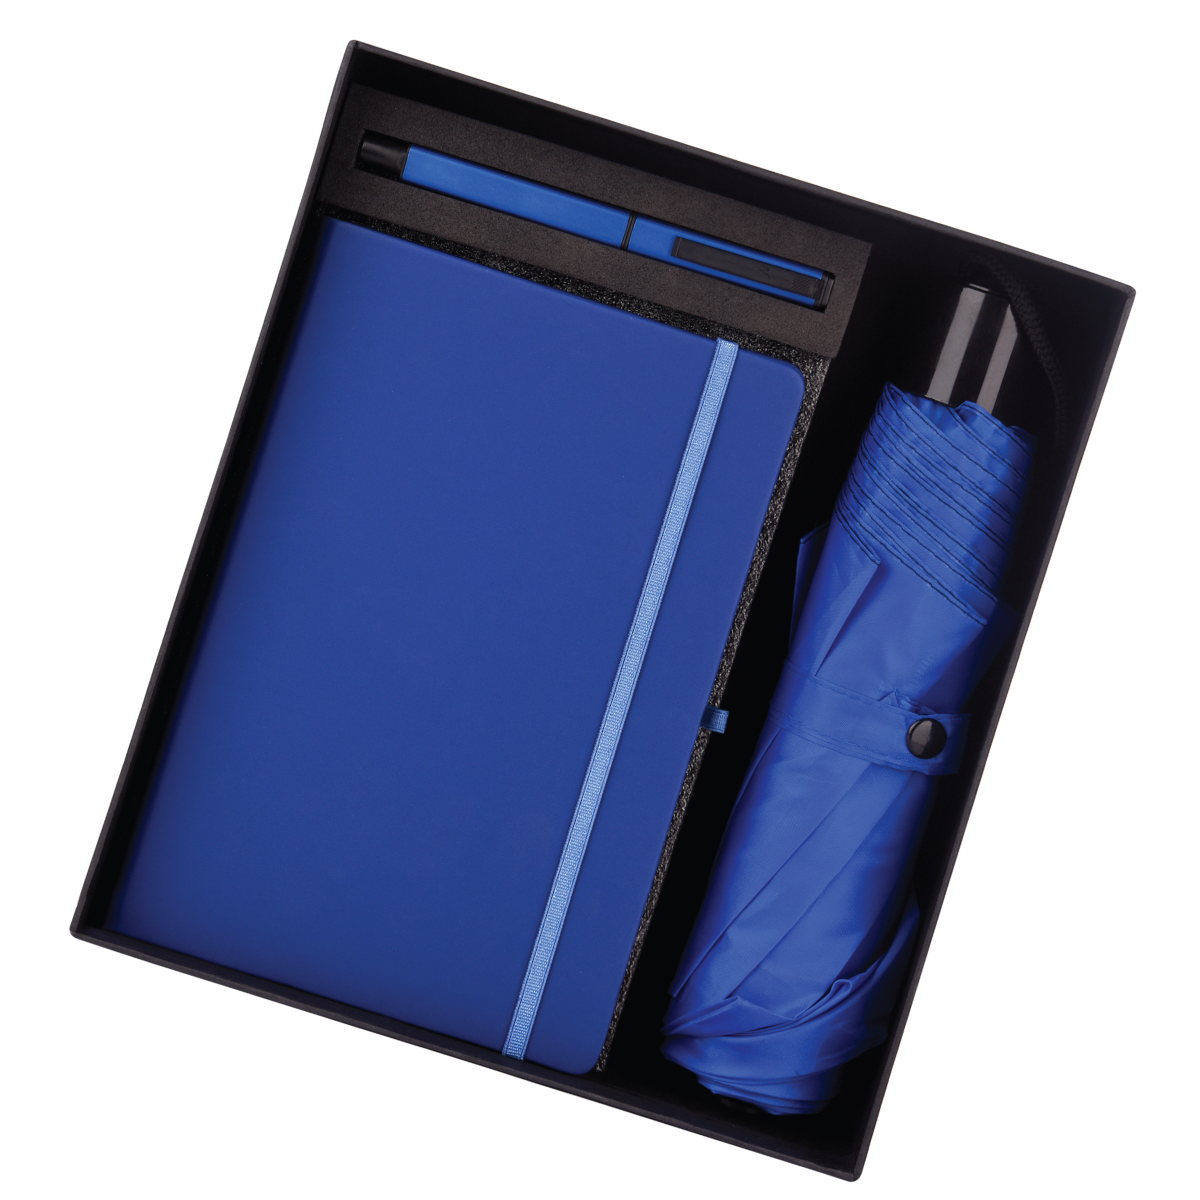 Blue 3 in 1 Black Combo Gift Set Umbrella, Pen, Soft Diary Notebook - For Employee Joining Kit, Corporate, Client or Dealer Gifting HK48